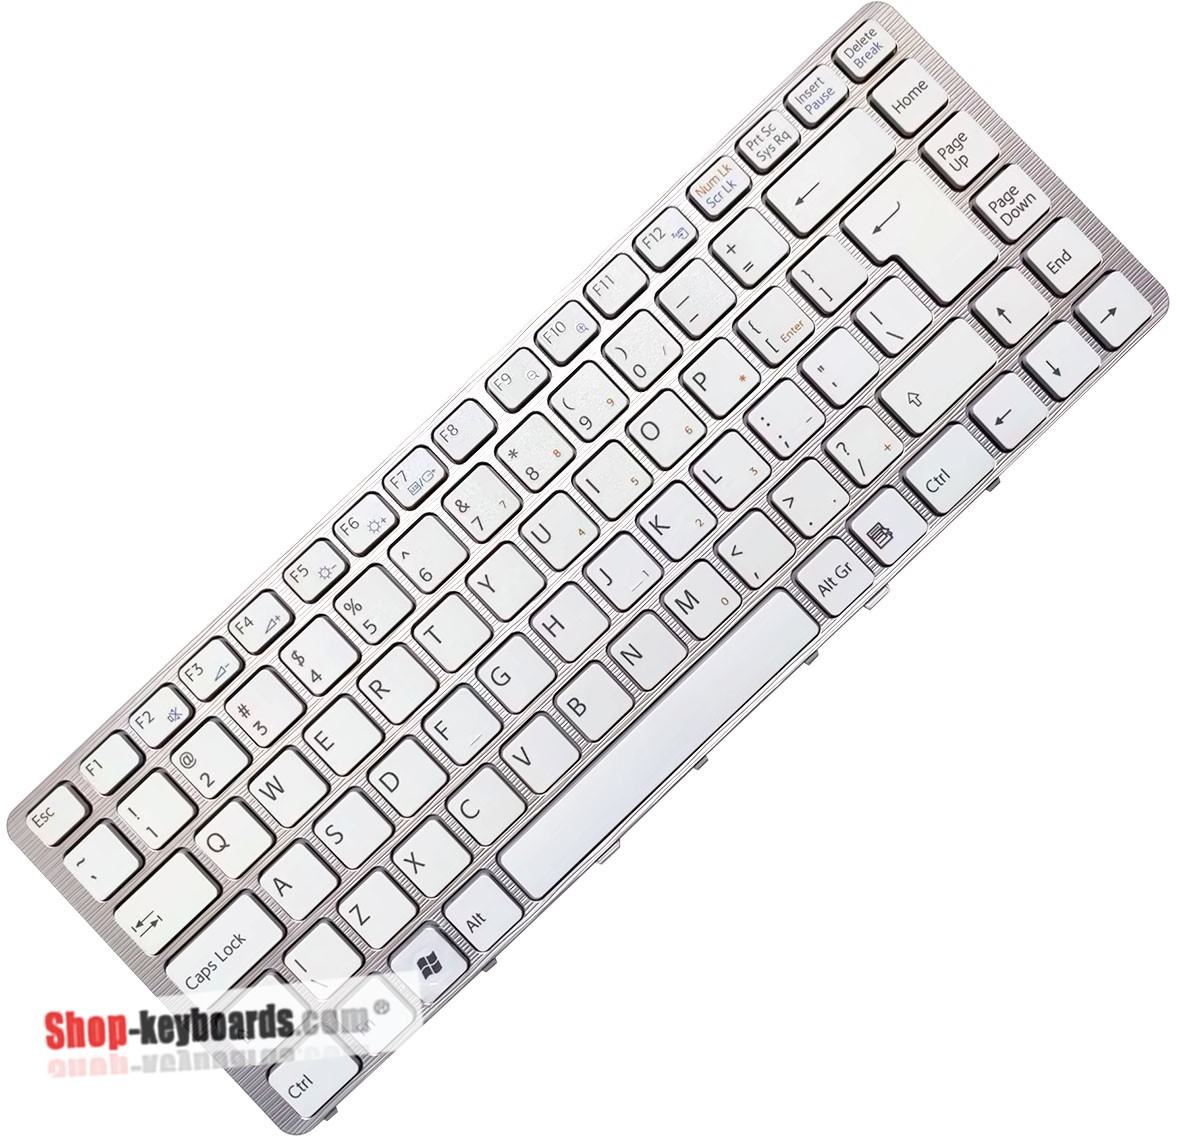 Sony 148763121 Keyboard replacement